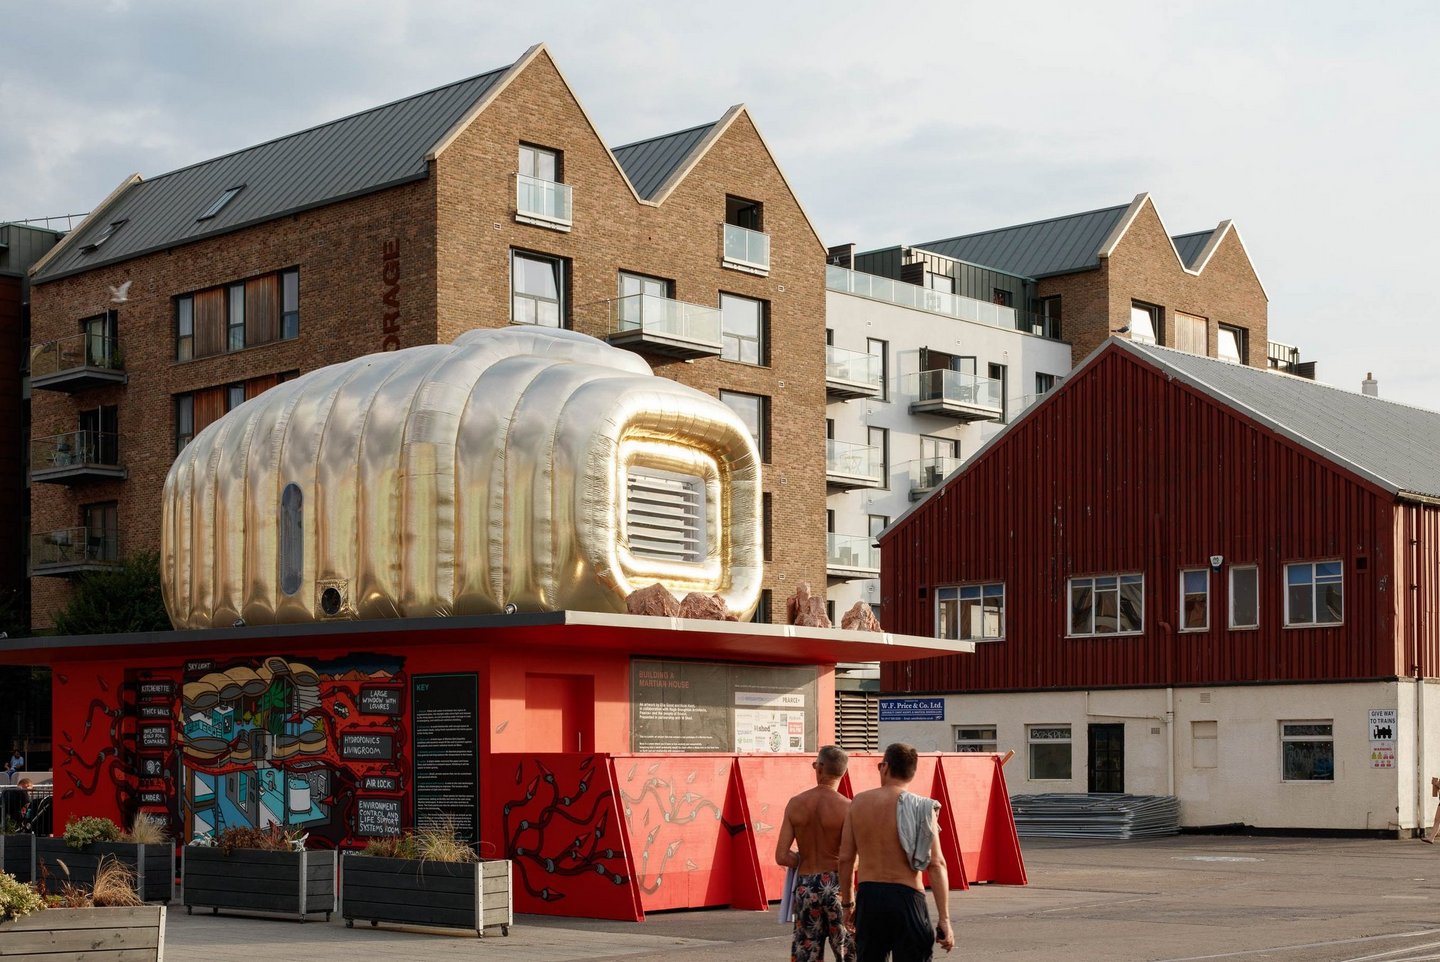 #This gold inflatable Martian house could be our future home on the Red Planet